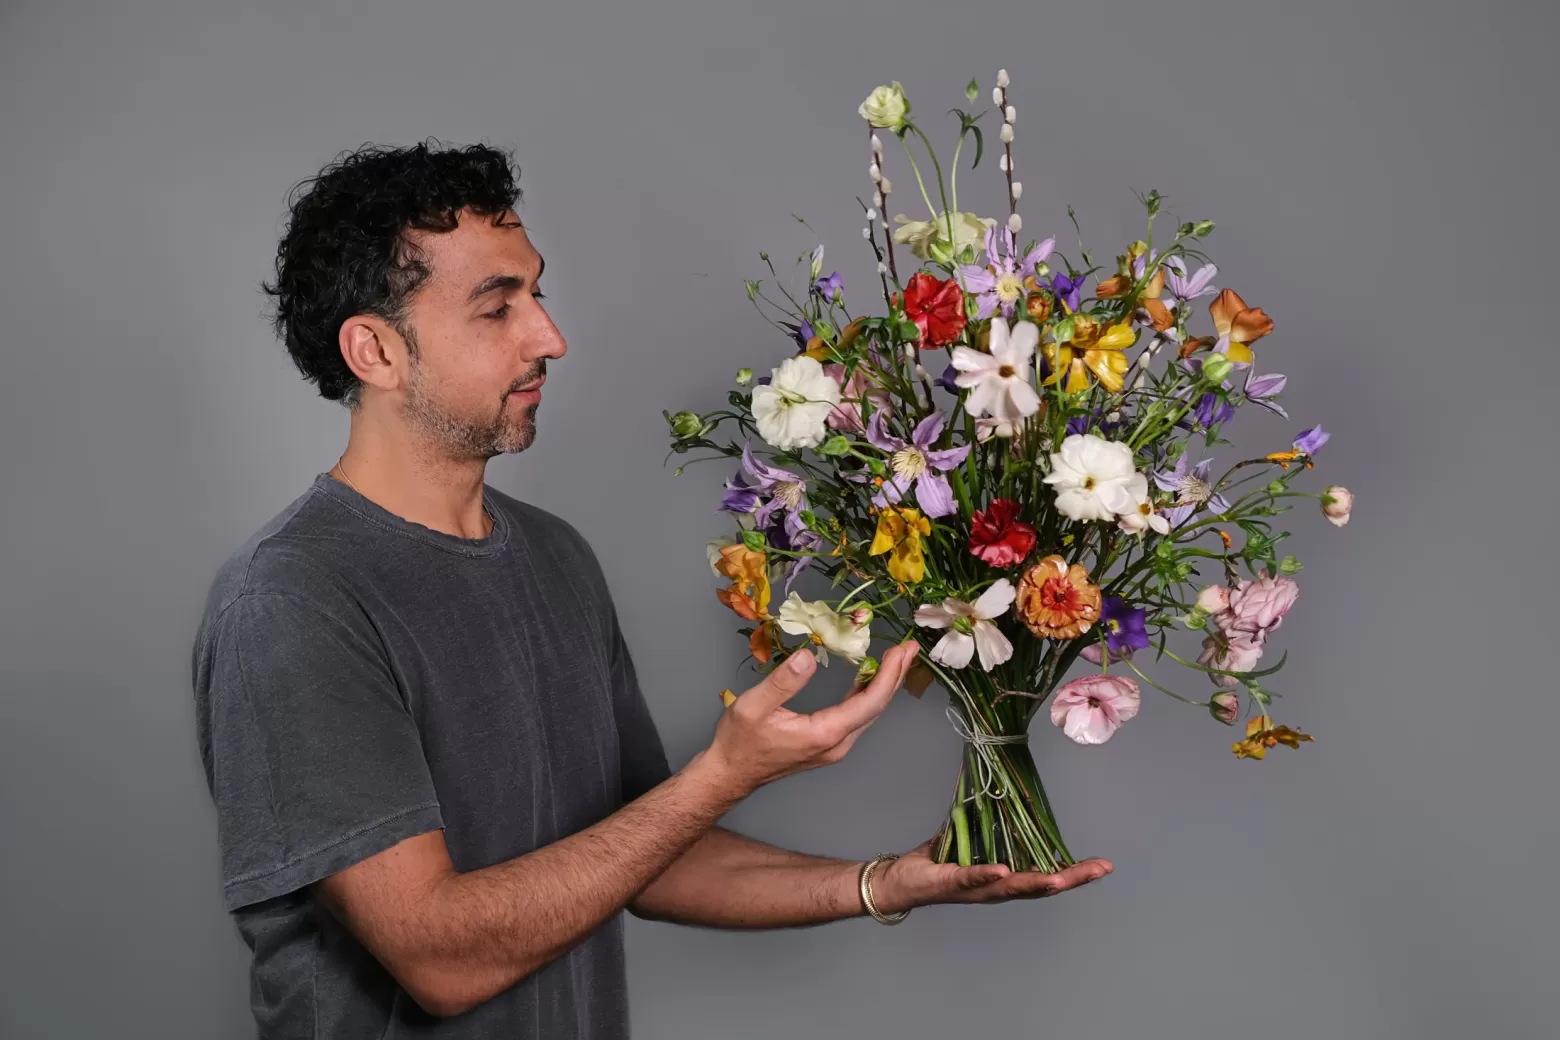 Dmitry Turcan with bouquet on his hand